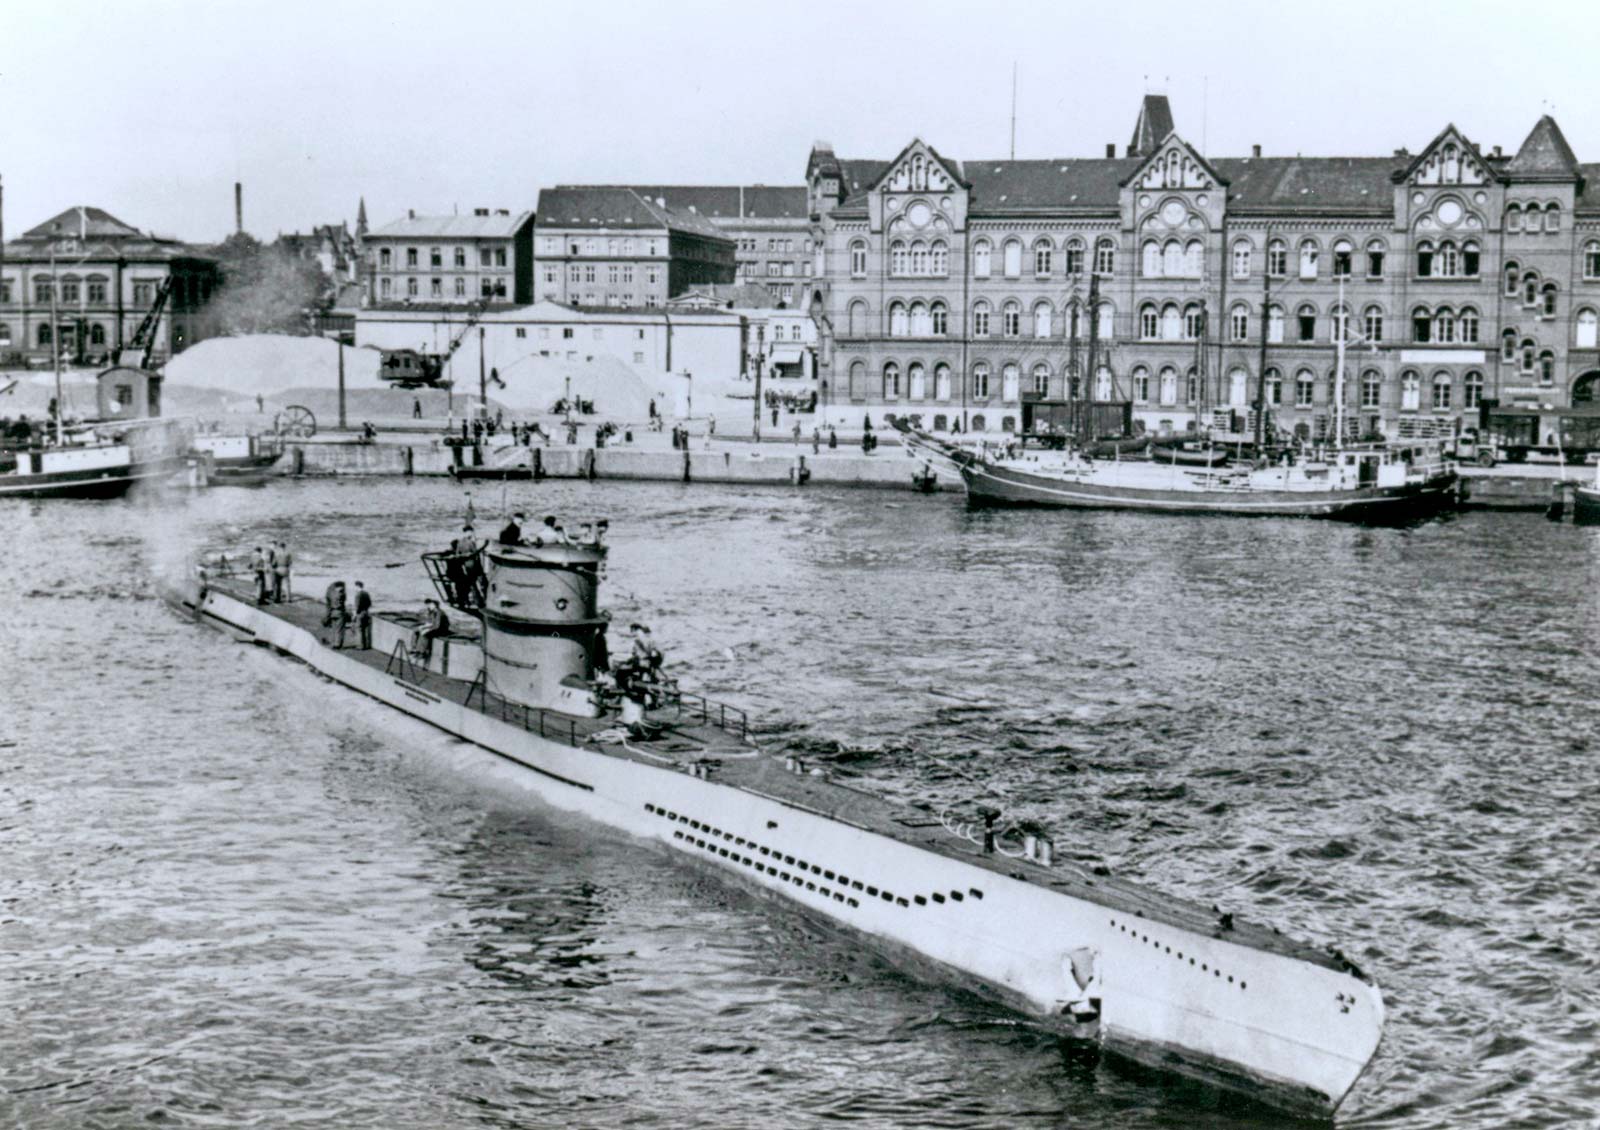 Down The Drain How Improper Bathroom Use Sank This Nazi Submarine The National Interest